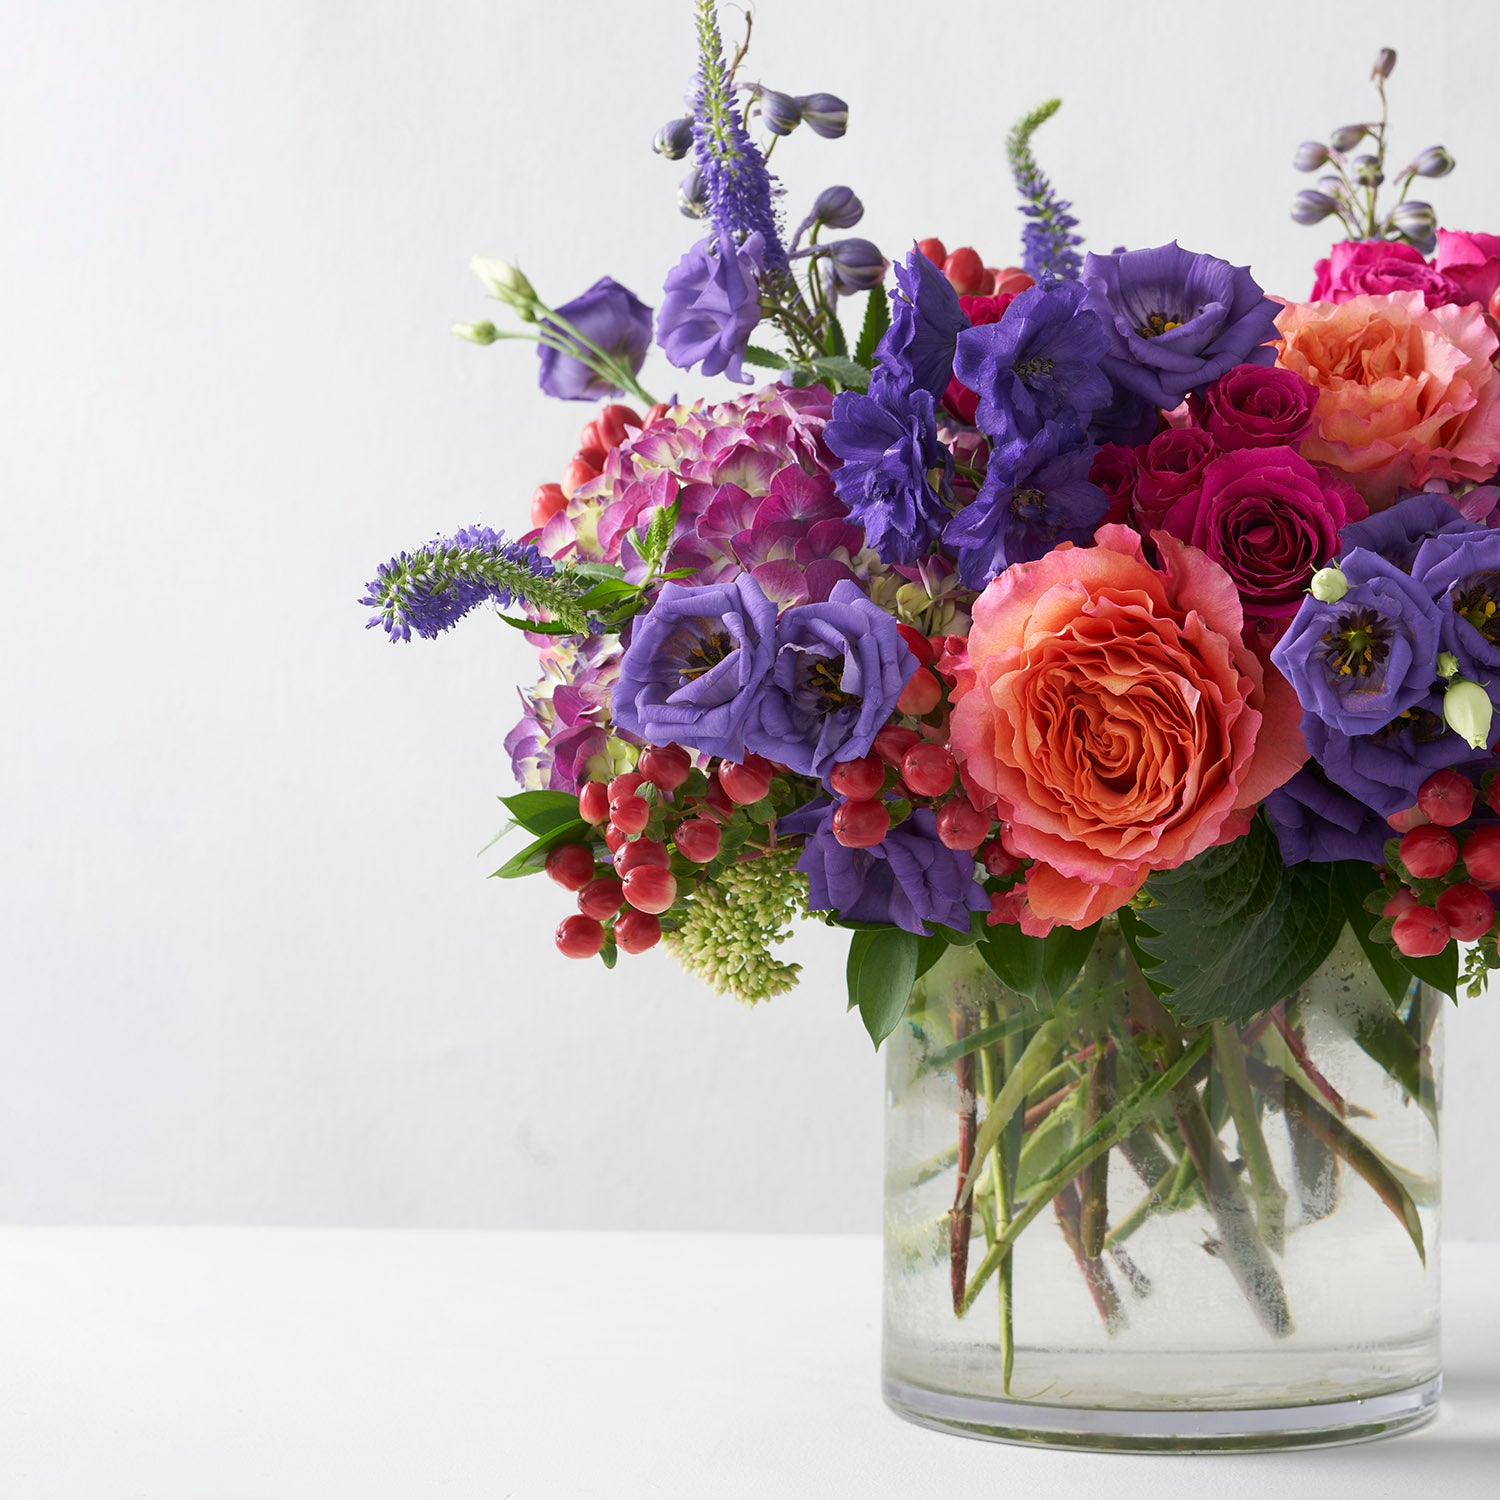 Arrangement of orange, purple, and hot pink flowers arranged in glass vase on white background.